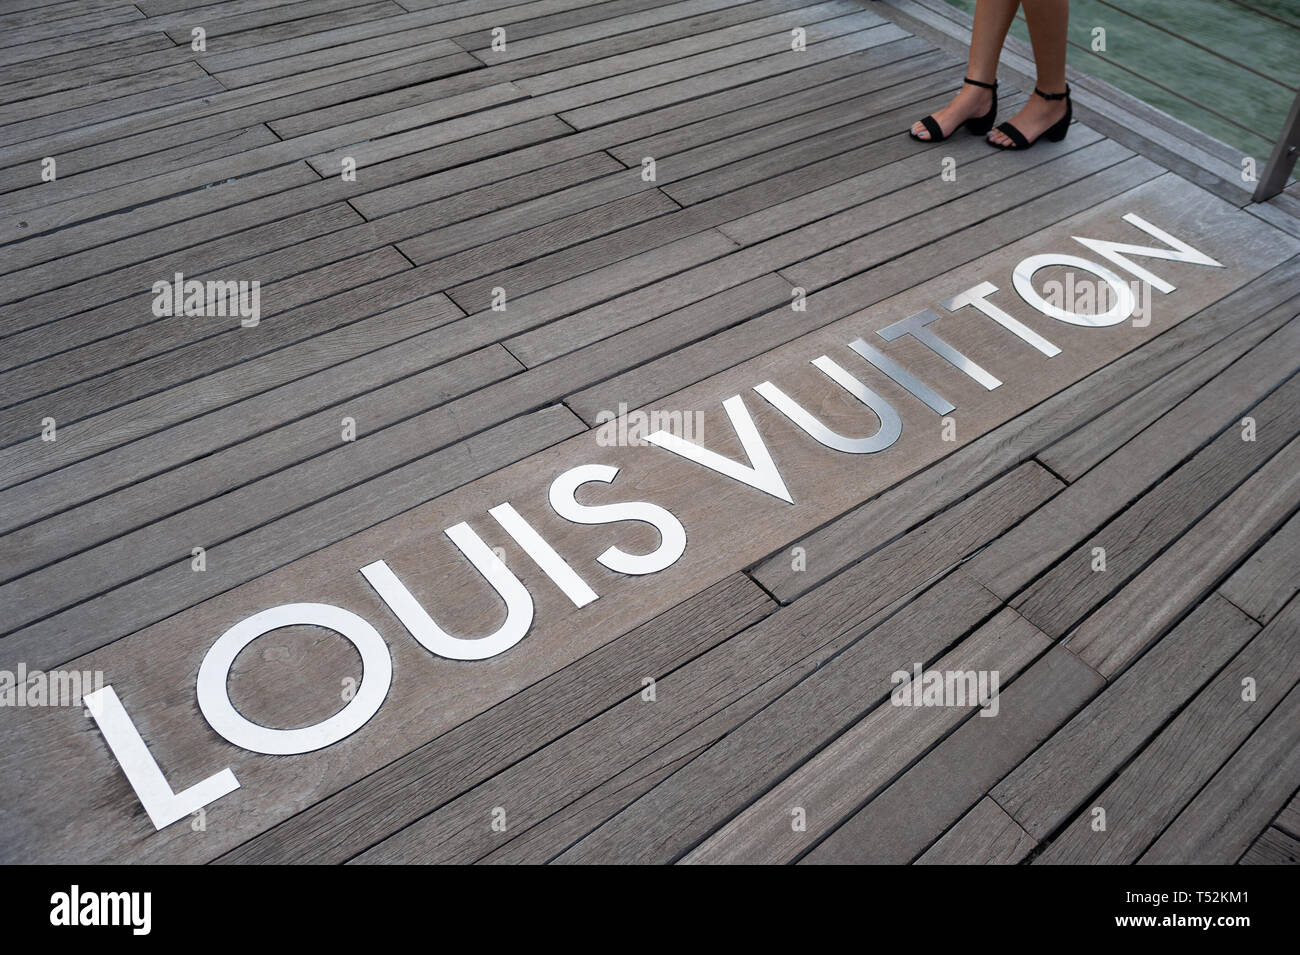 12.04.2019, Singapore, Republic of Singapore, Asia - A wooden walkway is leading to the Louis Vuitton luxury boutique at the Marina Bay Sands. Stock Photo